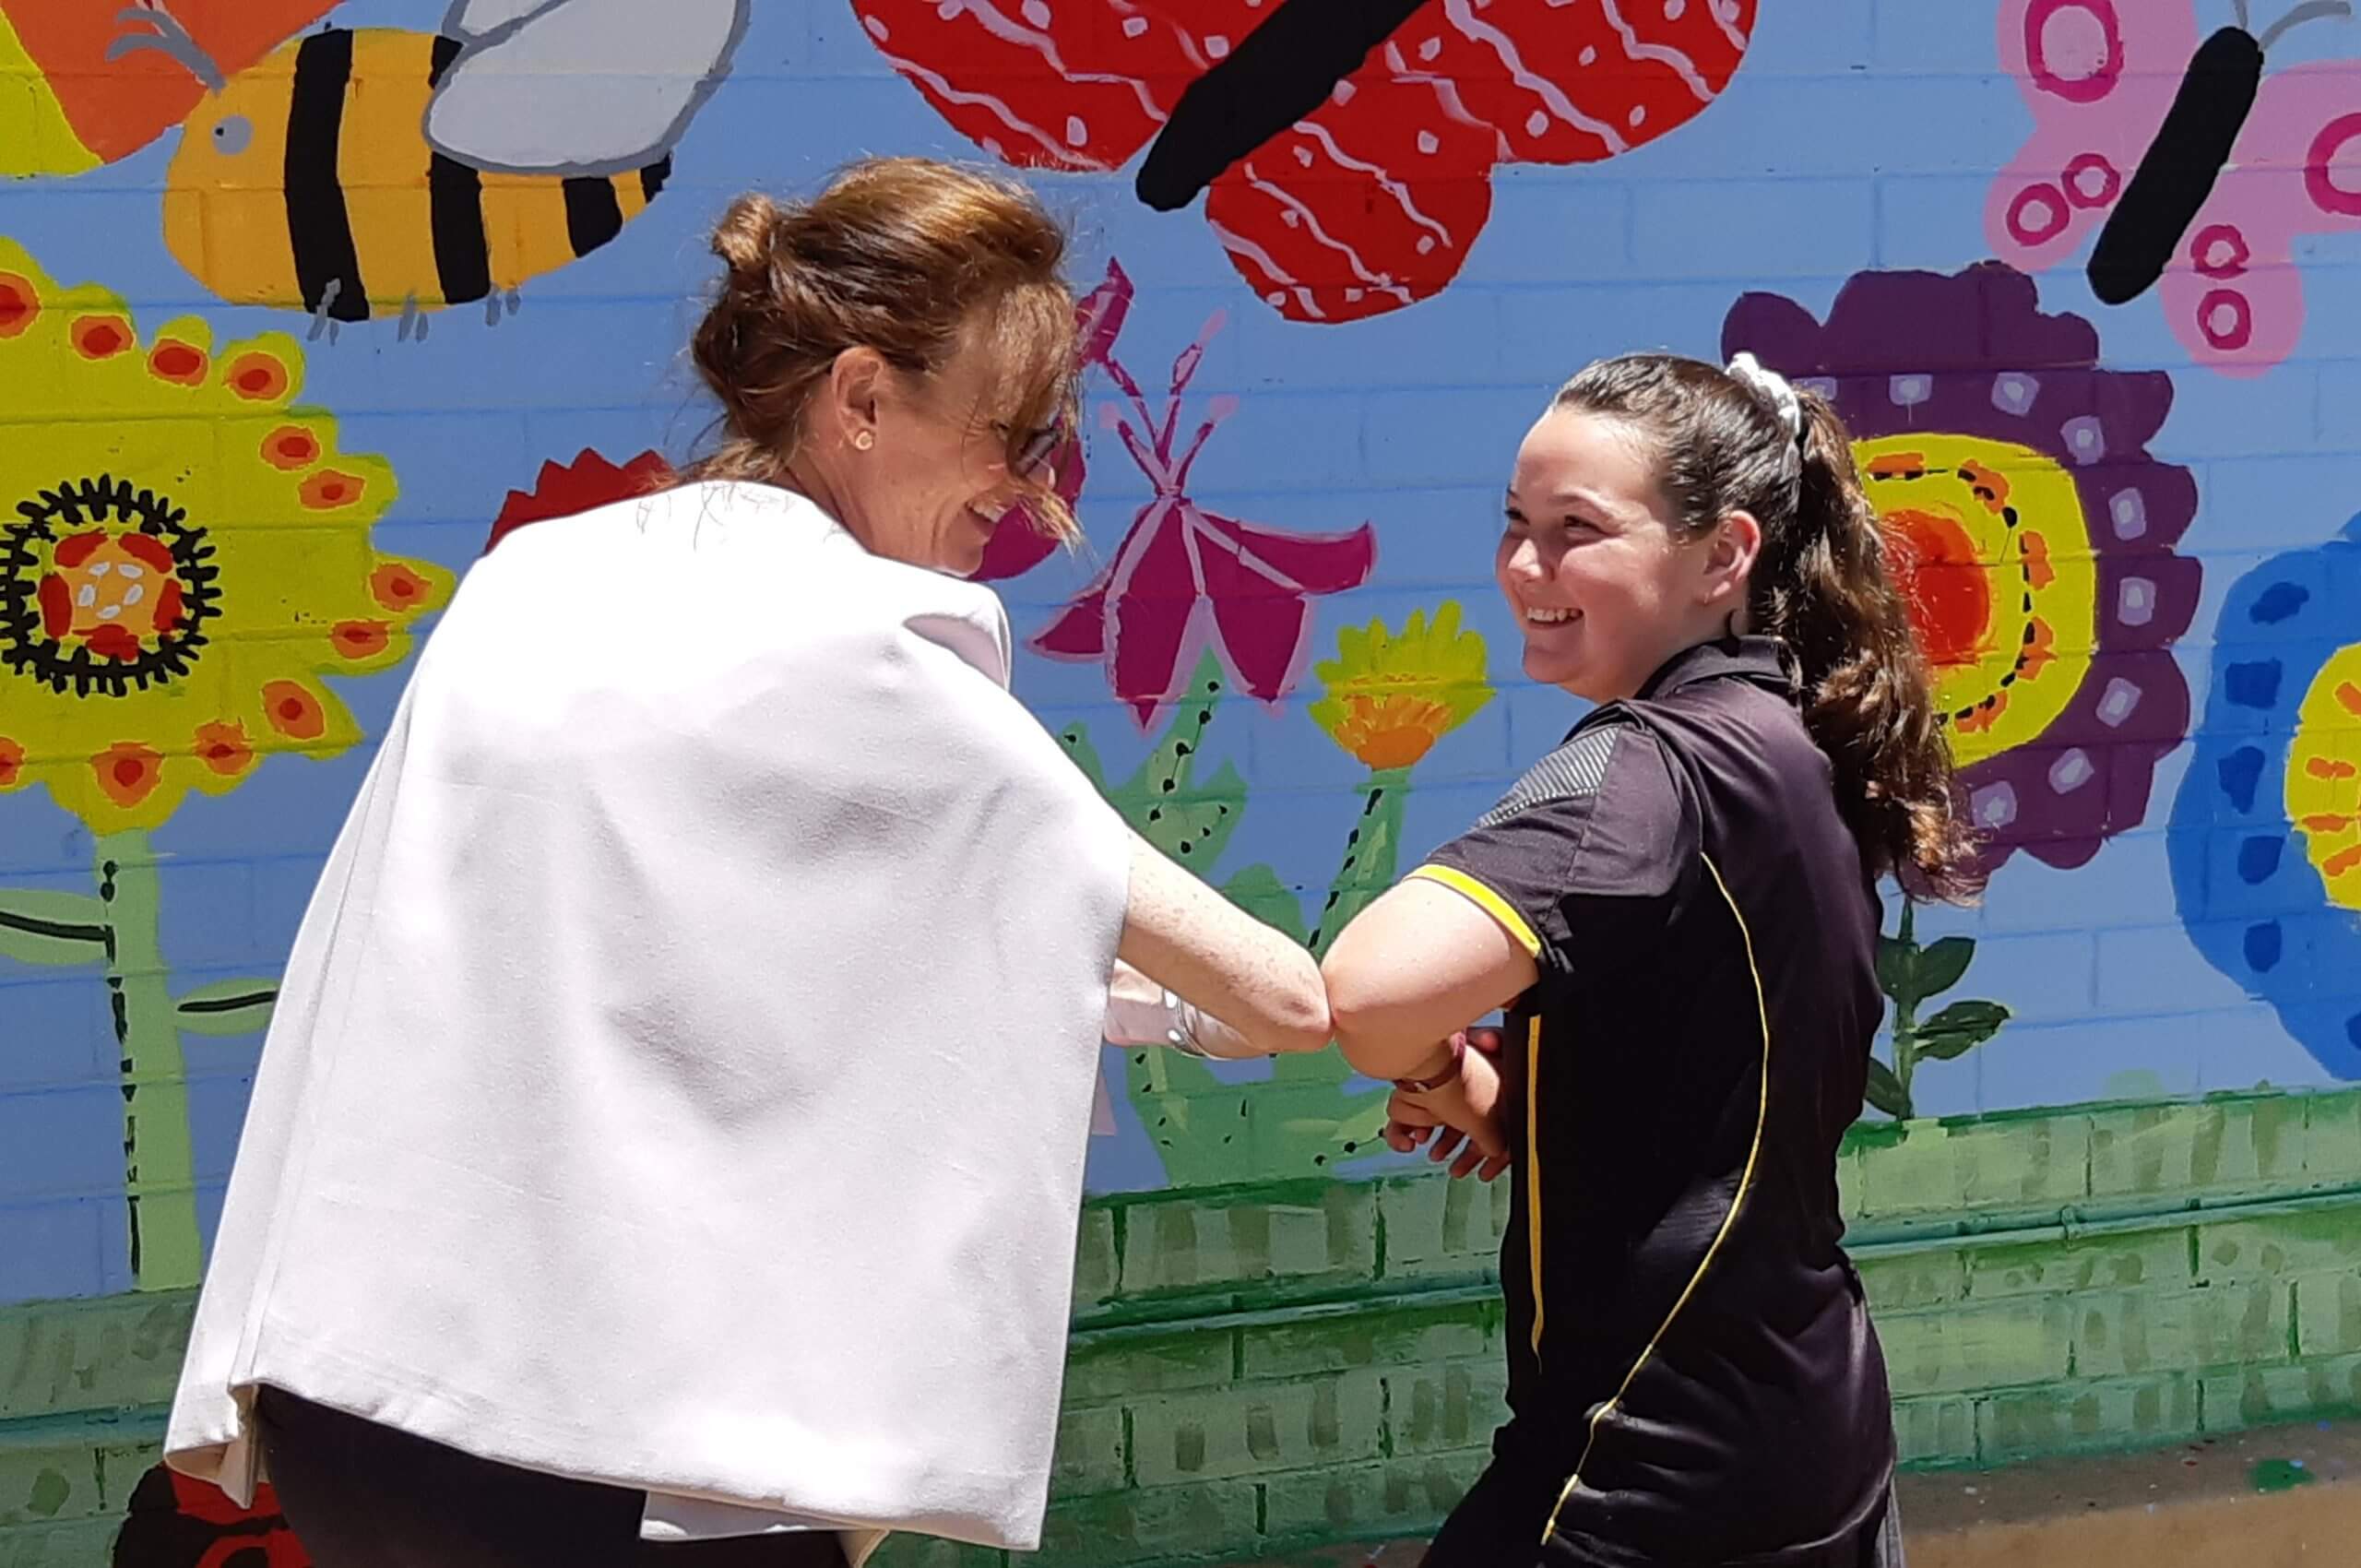 Steph Cooke and a female student bump elbows in front of a brightly painted wall with large flowers, butterflies and bees.